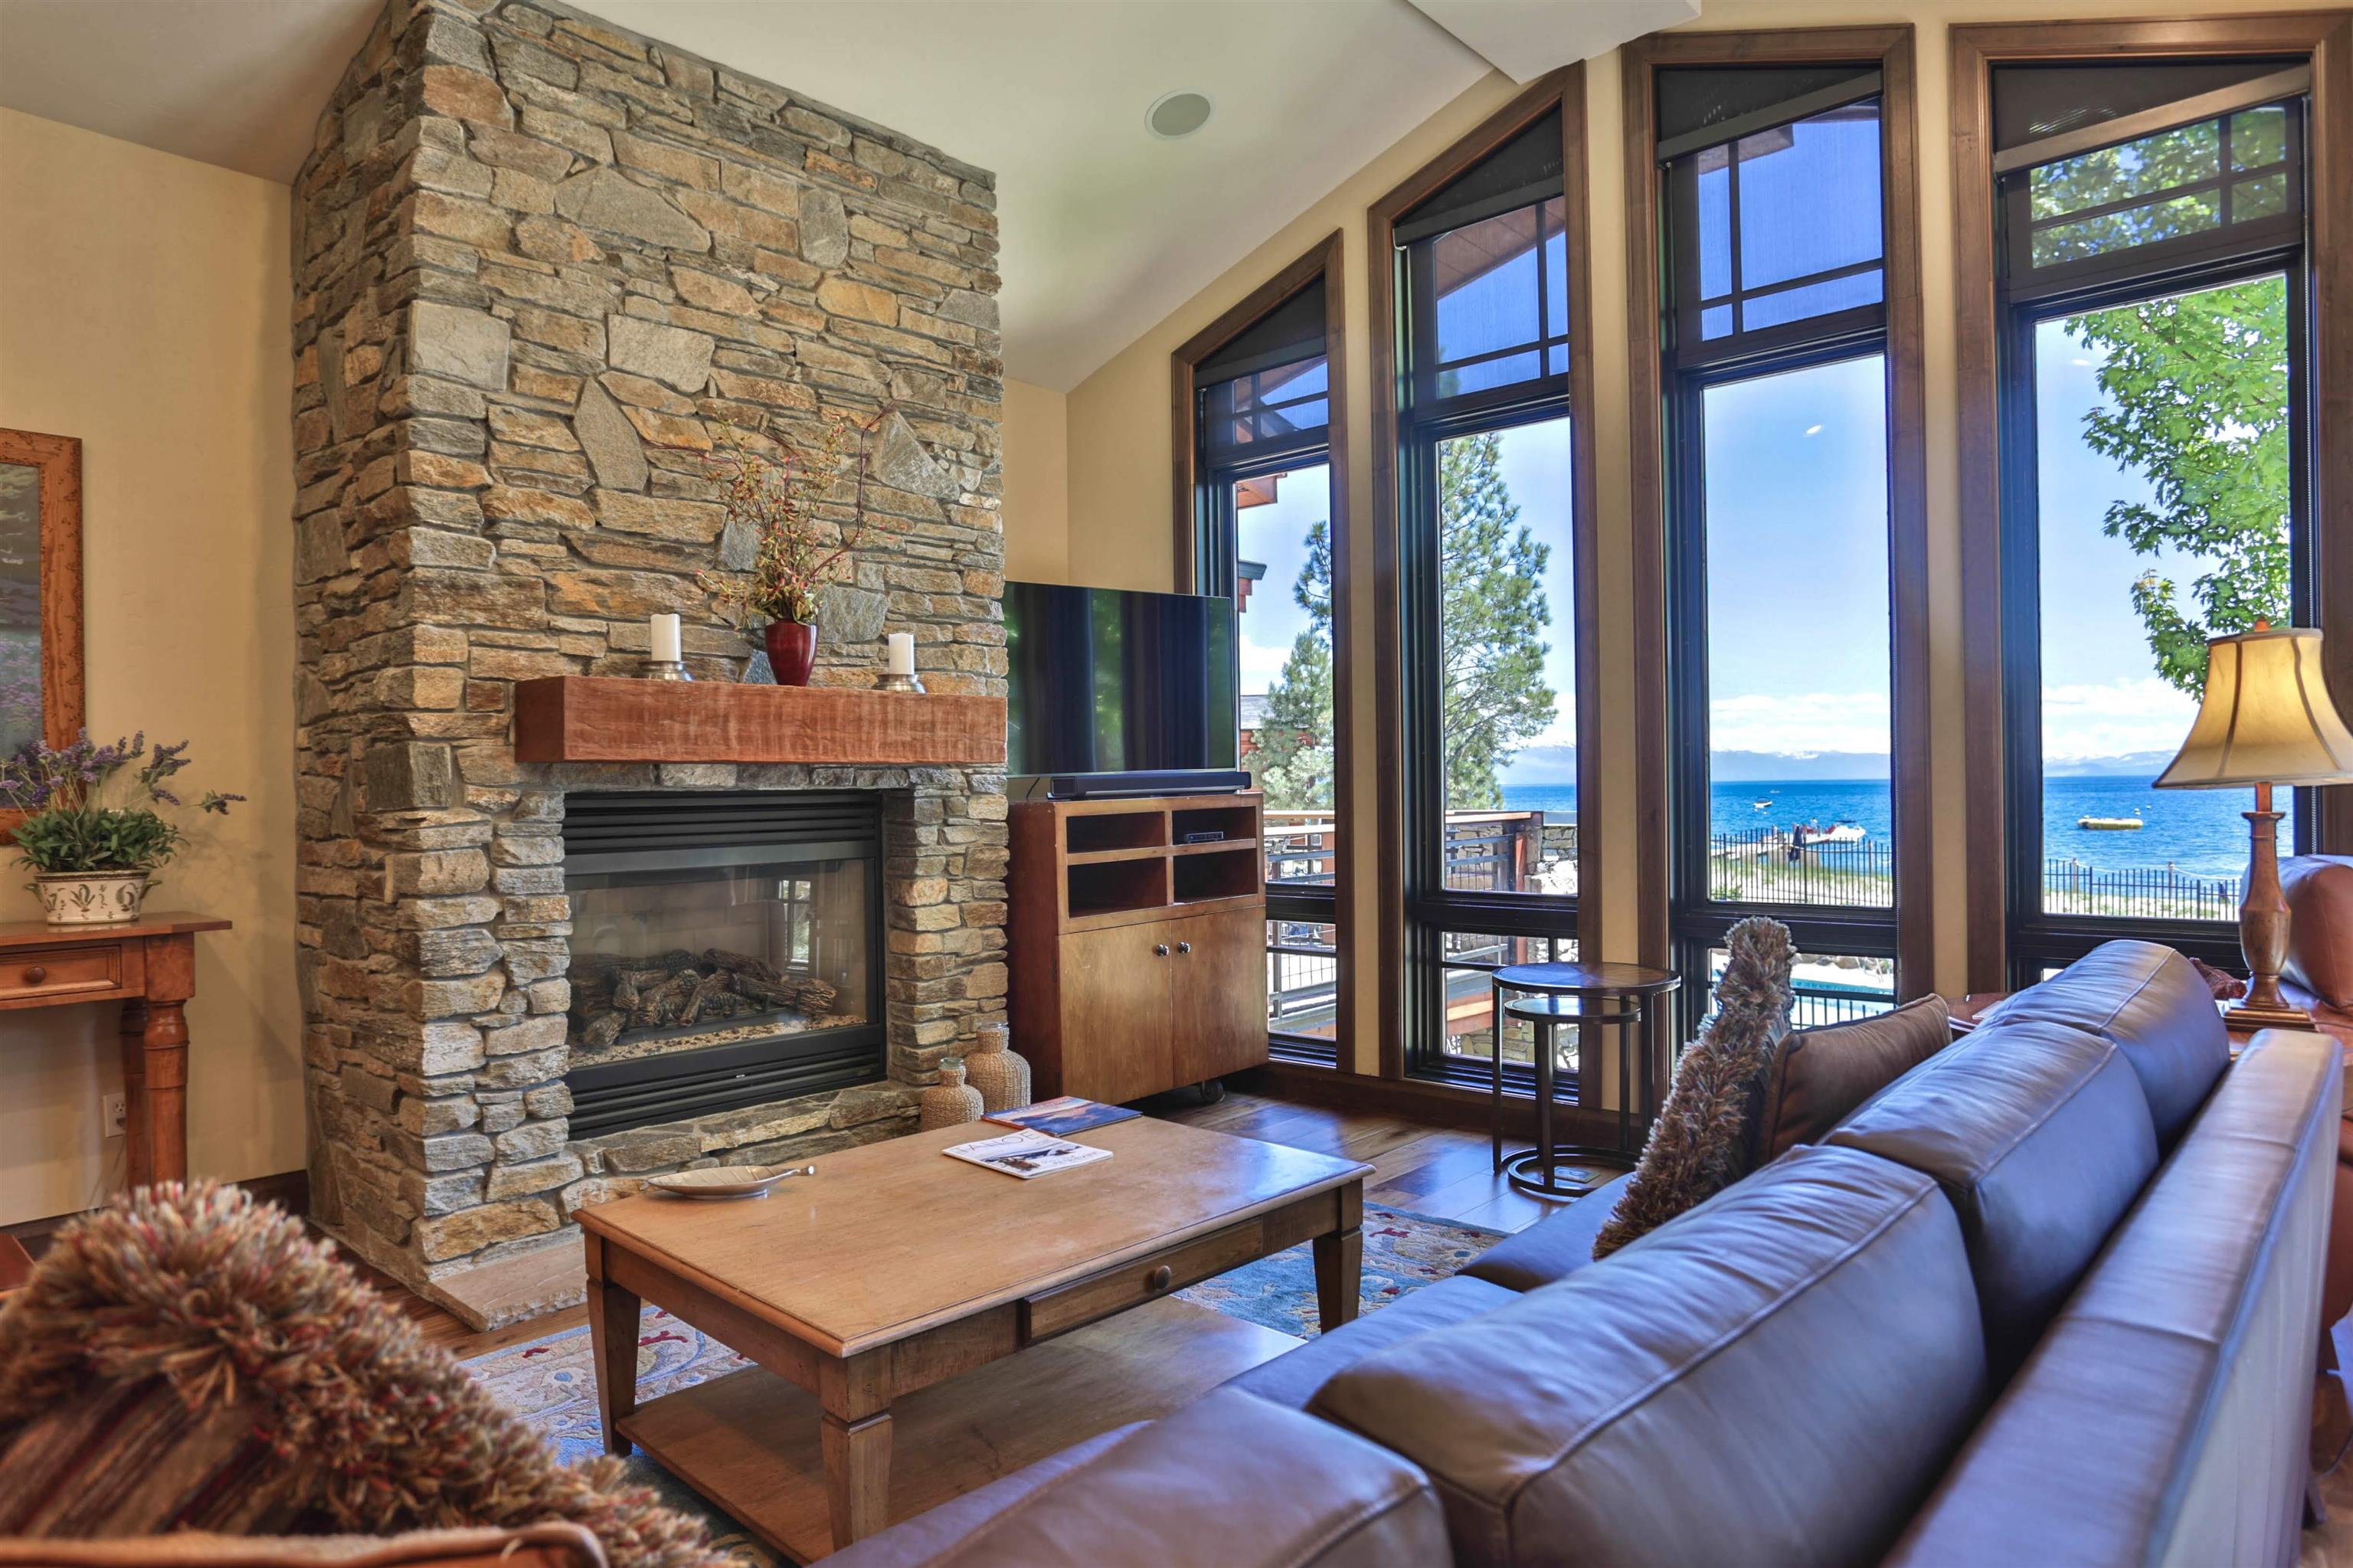 Exceptional Fractional Residence Club in Tahoe Vista.  This offering is a 1/7th share which includes 6 planned weeks a year plus an option for additional weeks based on space available.  Amenities include a private pier, 12 buoys, water toys for the whole family, clubhouse, pool and hot tub, fire pit and BBQ area.   You definitely want to come see this amazing lake front property.